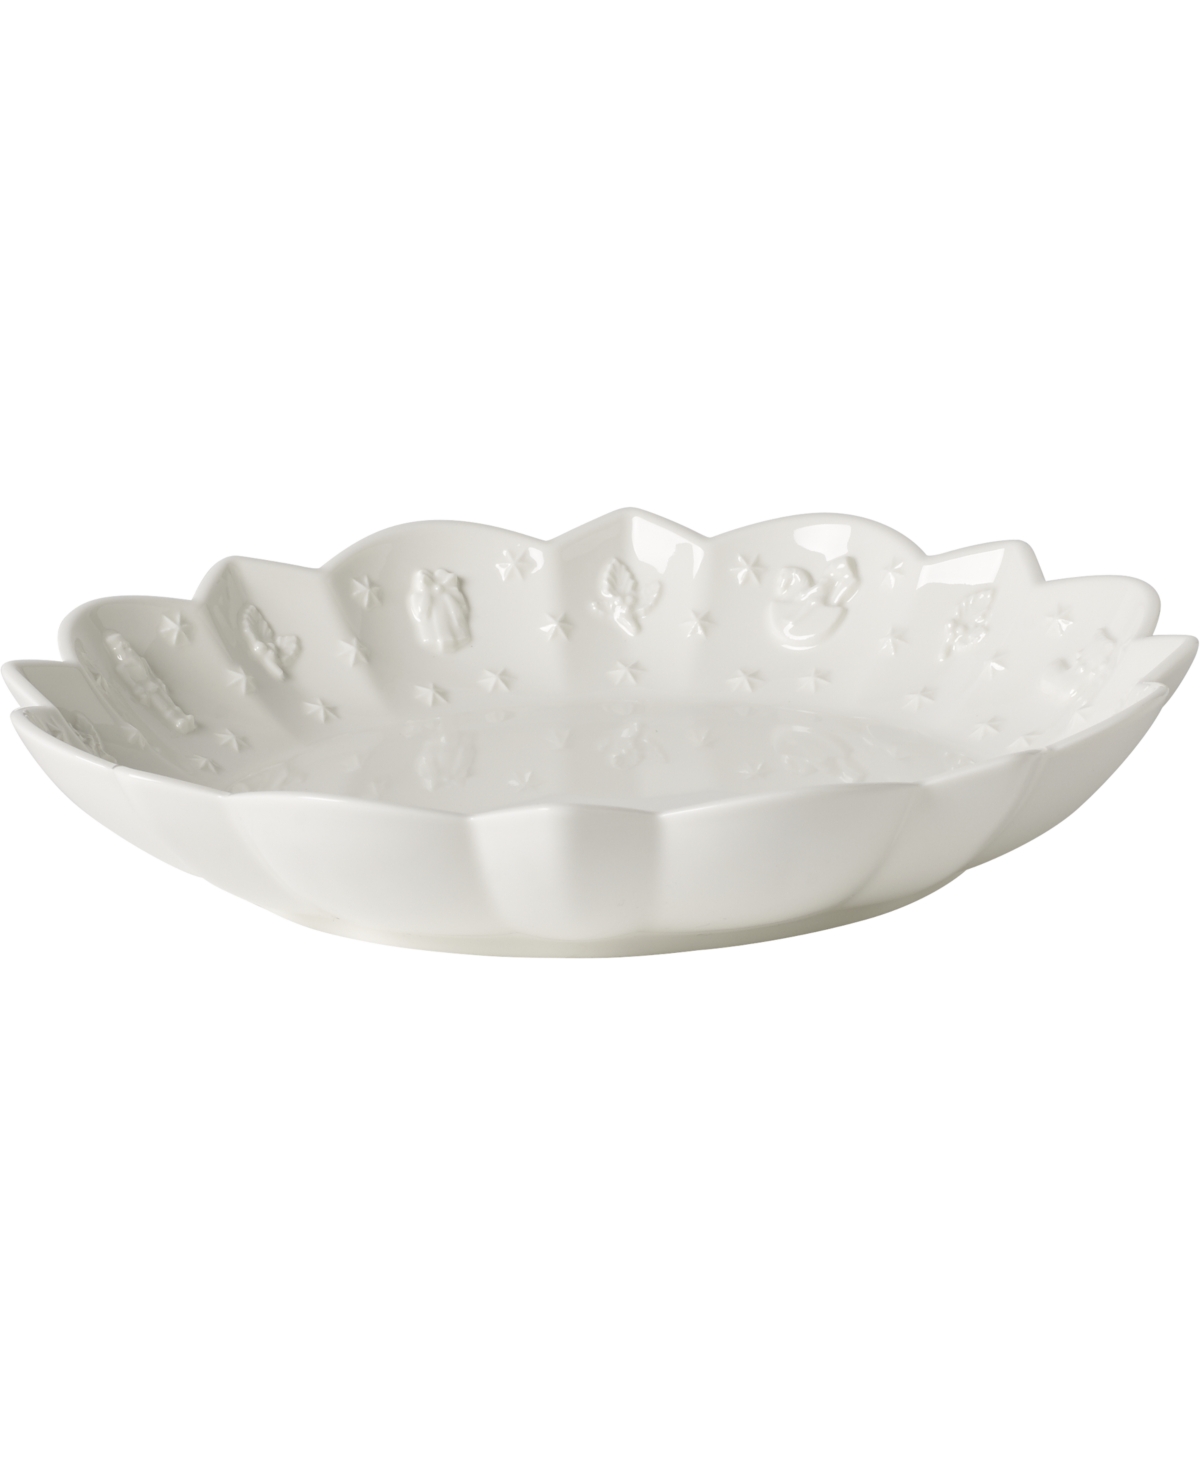 Toys Delight Royal Classic Small Fruit Bowl - White